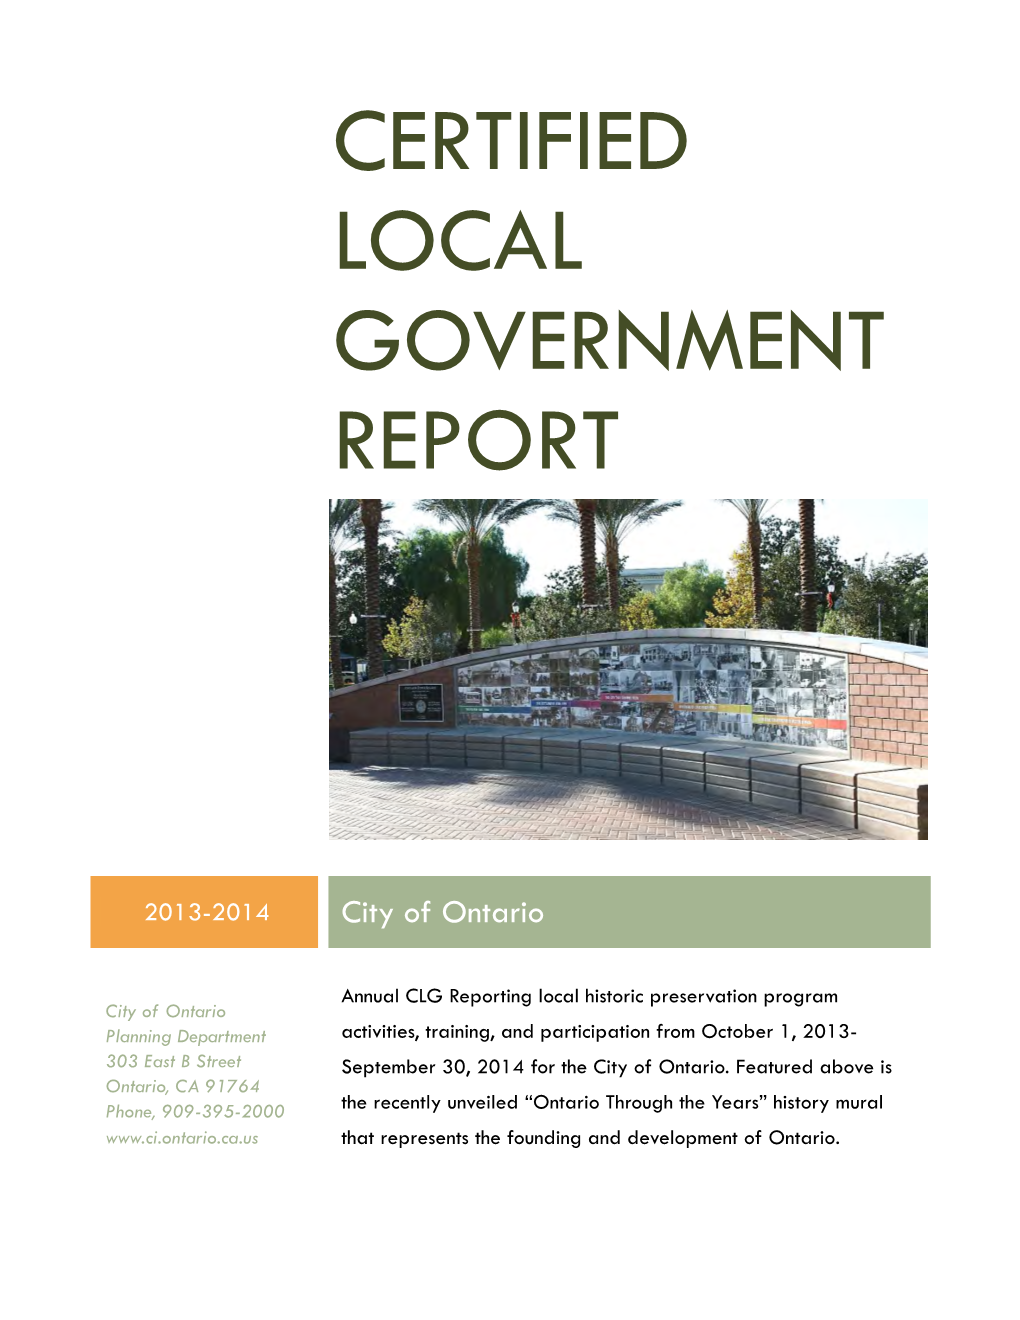 Certified Local Government Report